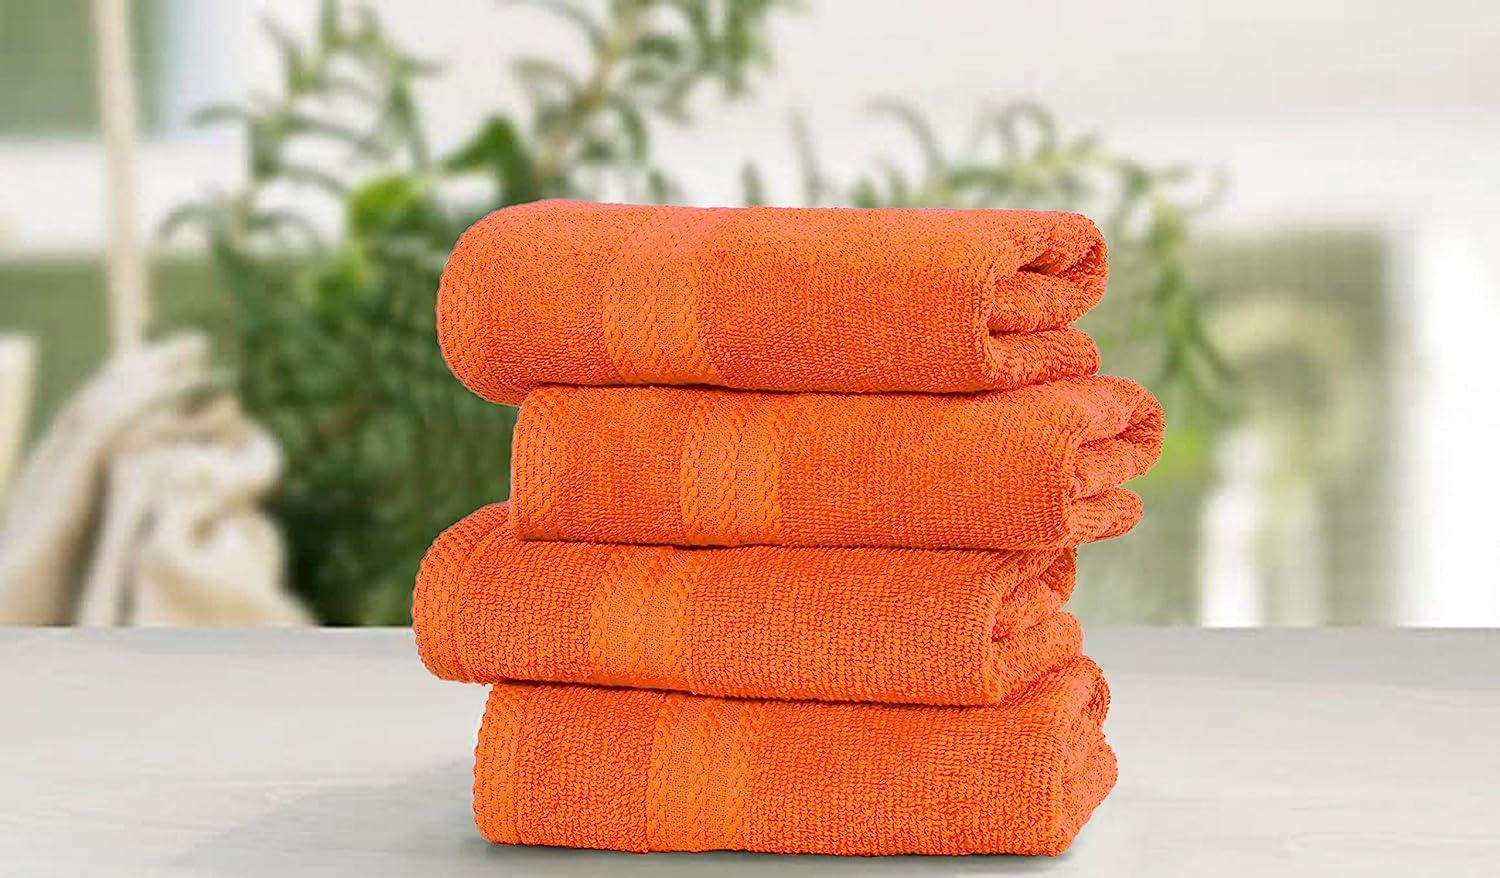 GLAMBURG Ultra Soft 6-Piece Hand Towel Set 16x28-100% Ringspun Cotton -  Durable & Highly Absorbent Hand Towels - Ideal for use in Bathroom, Kitchen,  Gym, Spa & General Cleaning - Orange